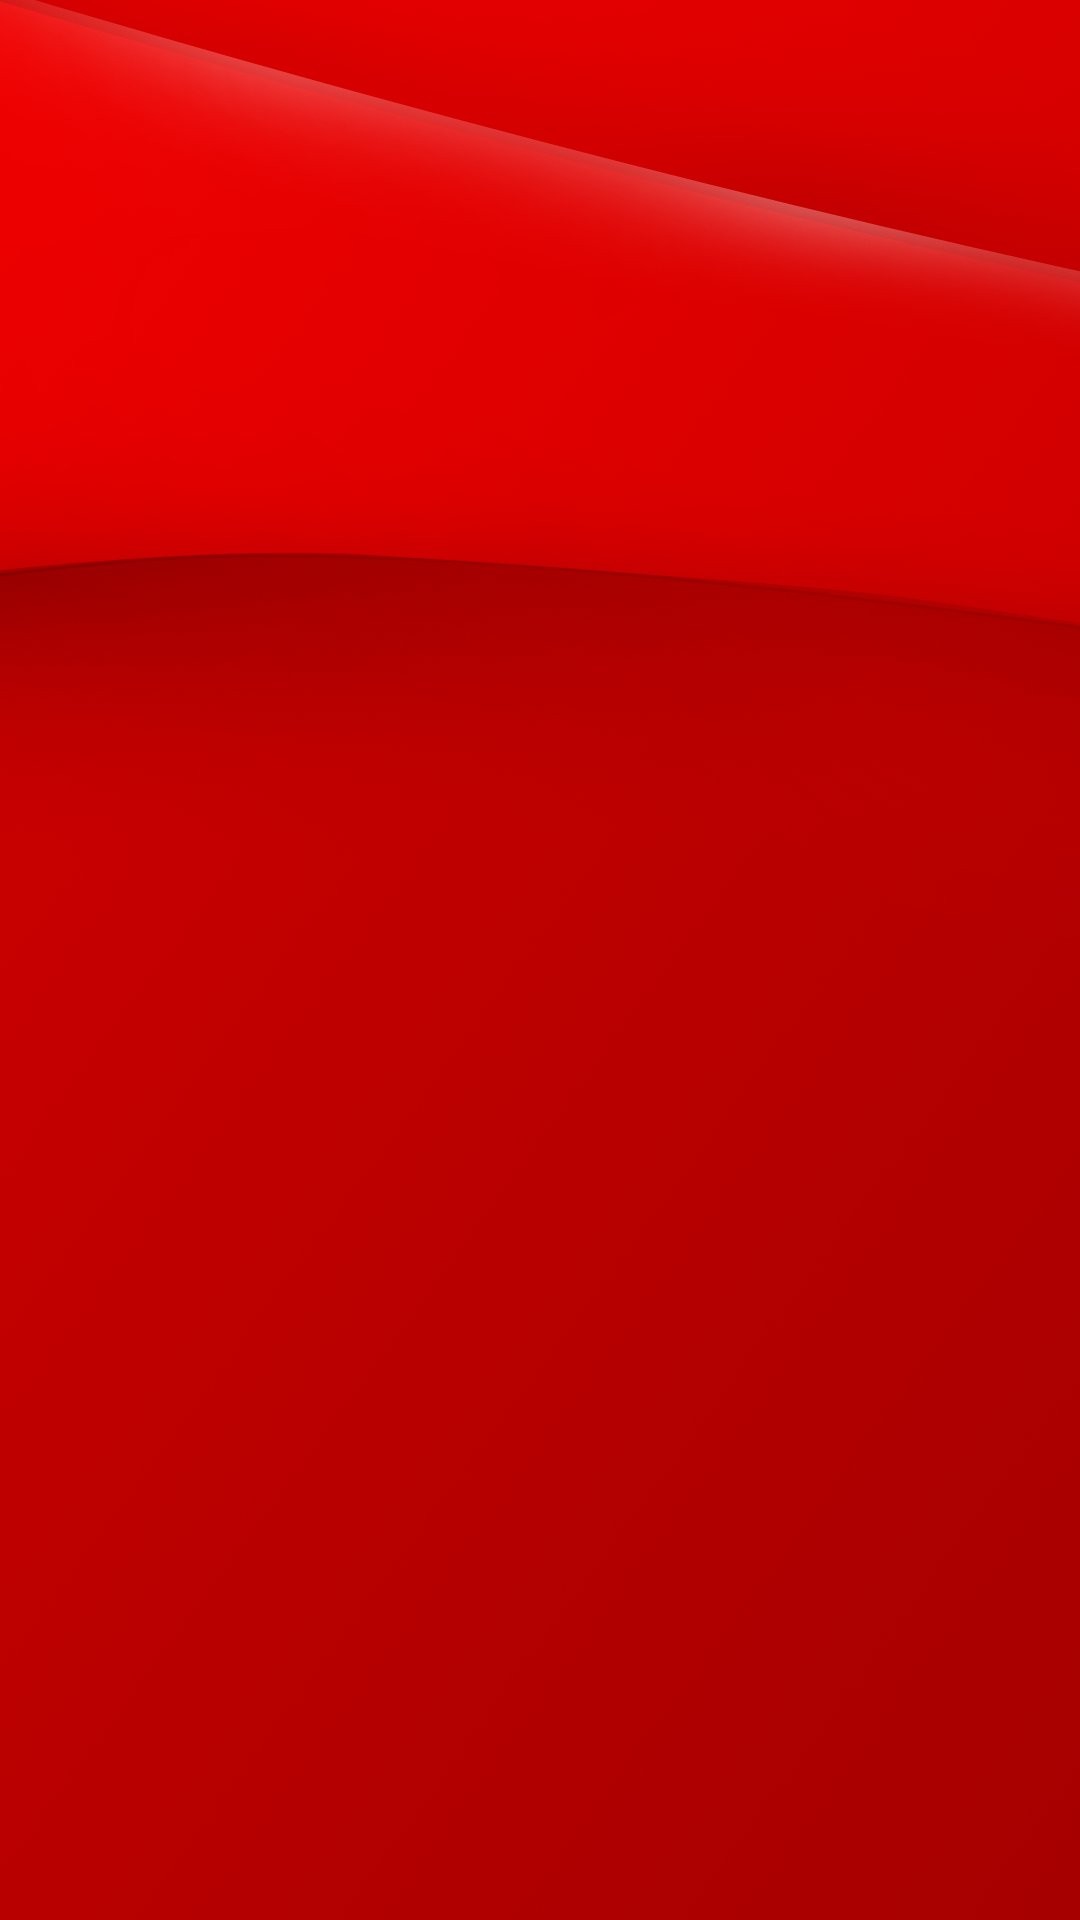 Best Red Abstract iPhone Wallpaper HD Photo Galeries Art Design